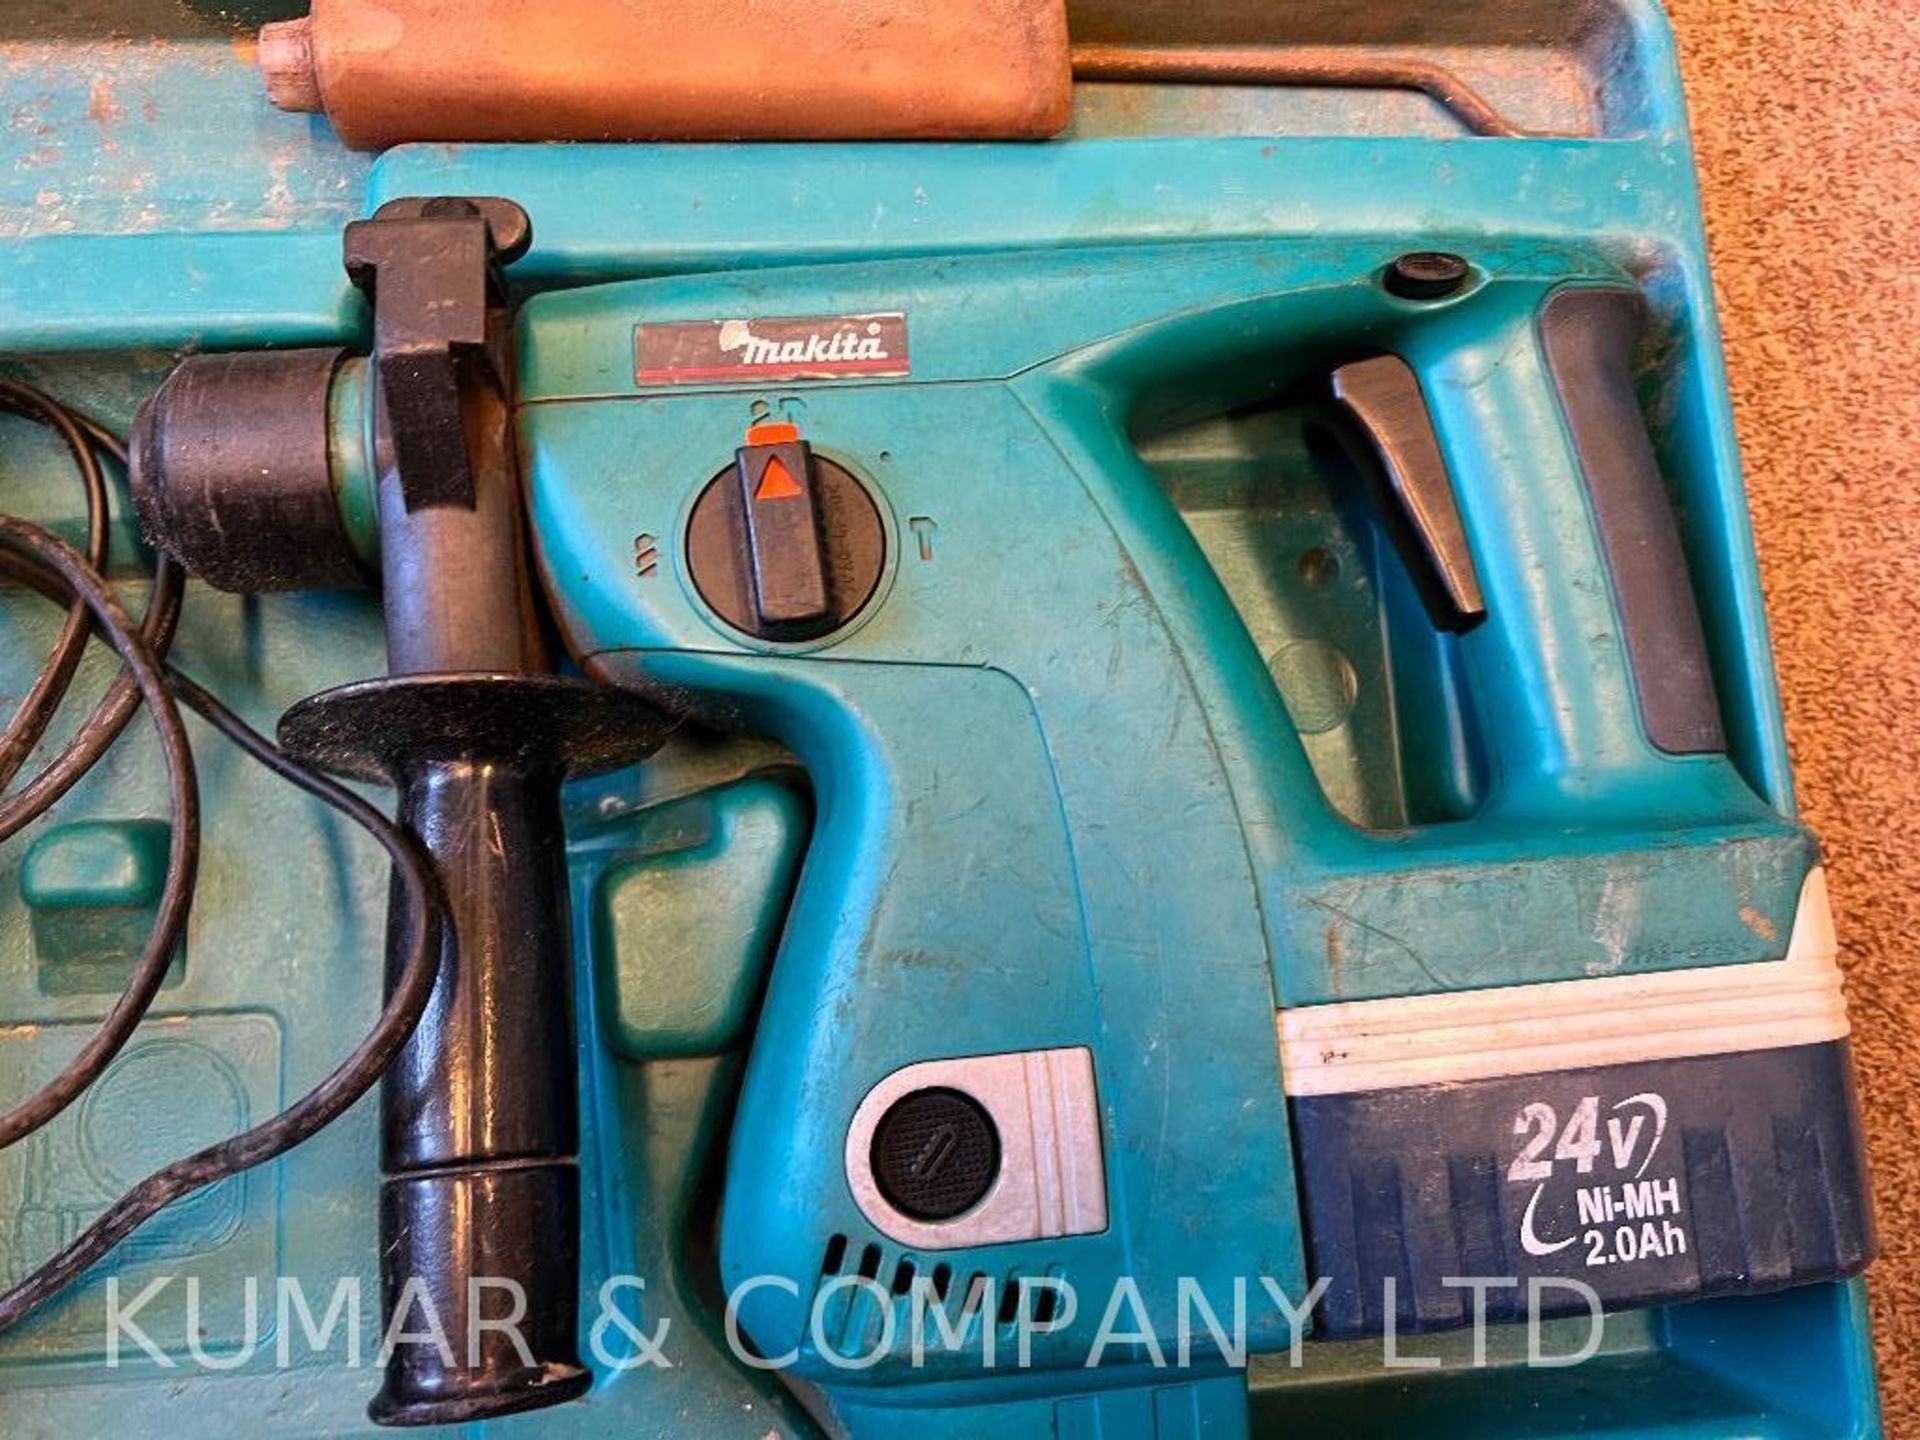 Makita BHR200 230v SDS Rotary Hammer Drill with Various Accessories in Case as Shown PLEASE NOTE: TH - Image 4 of 5